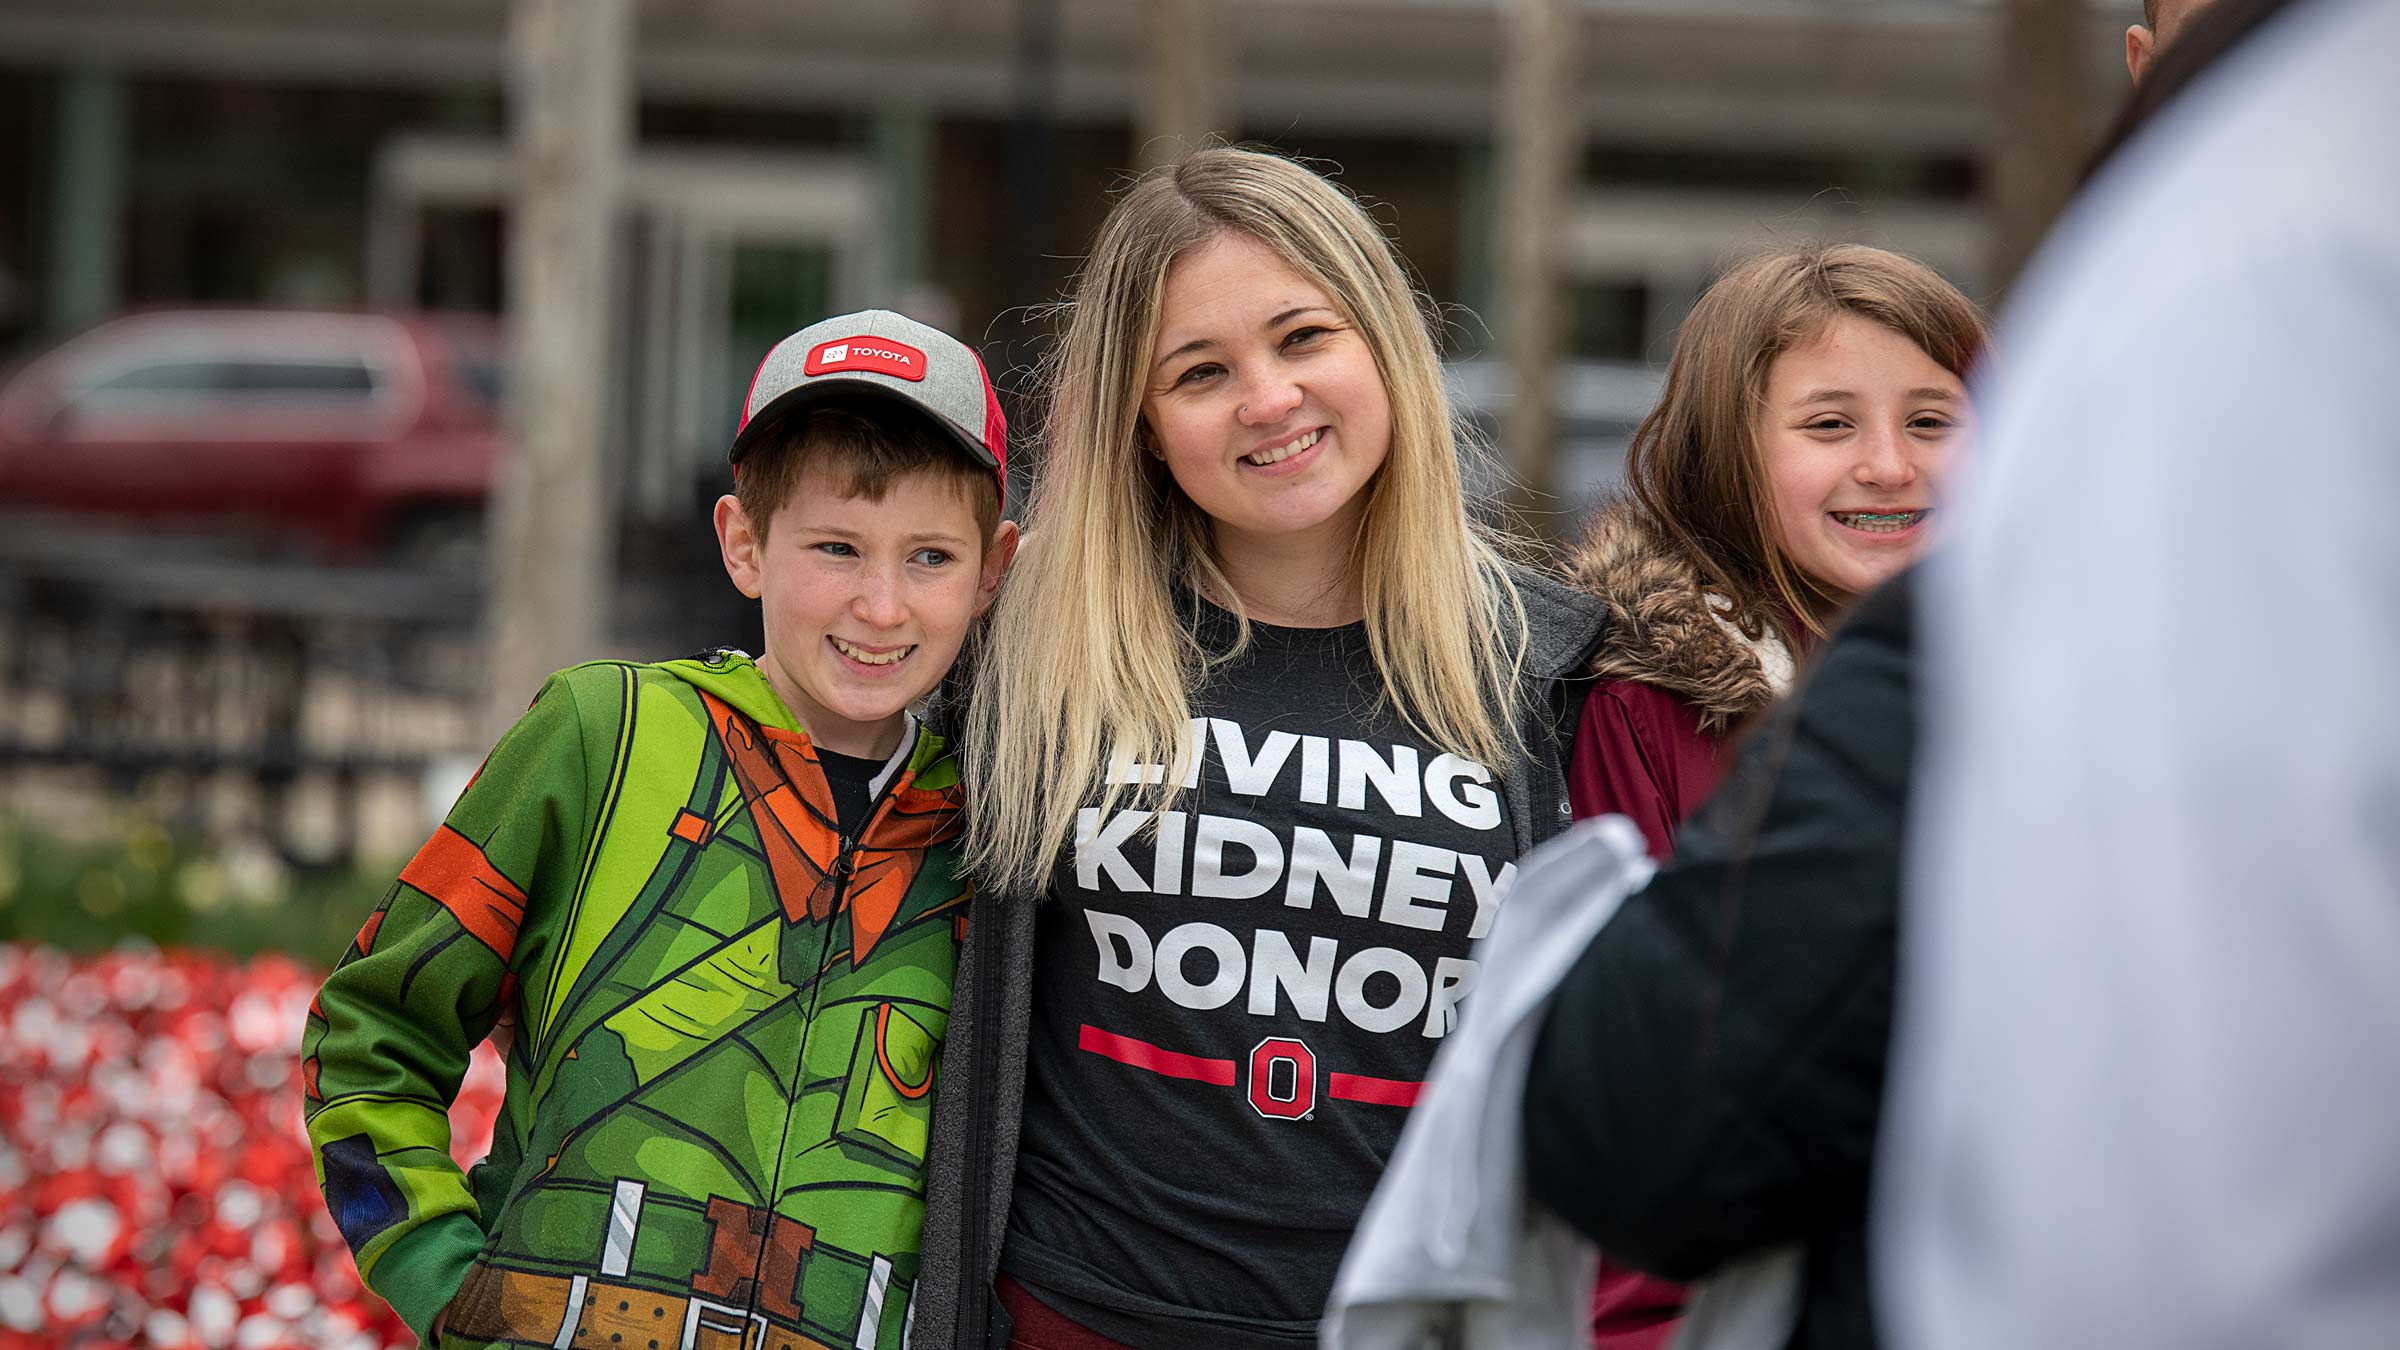 Family posing together wearing living kidney donor t-shirts